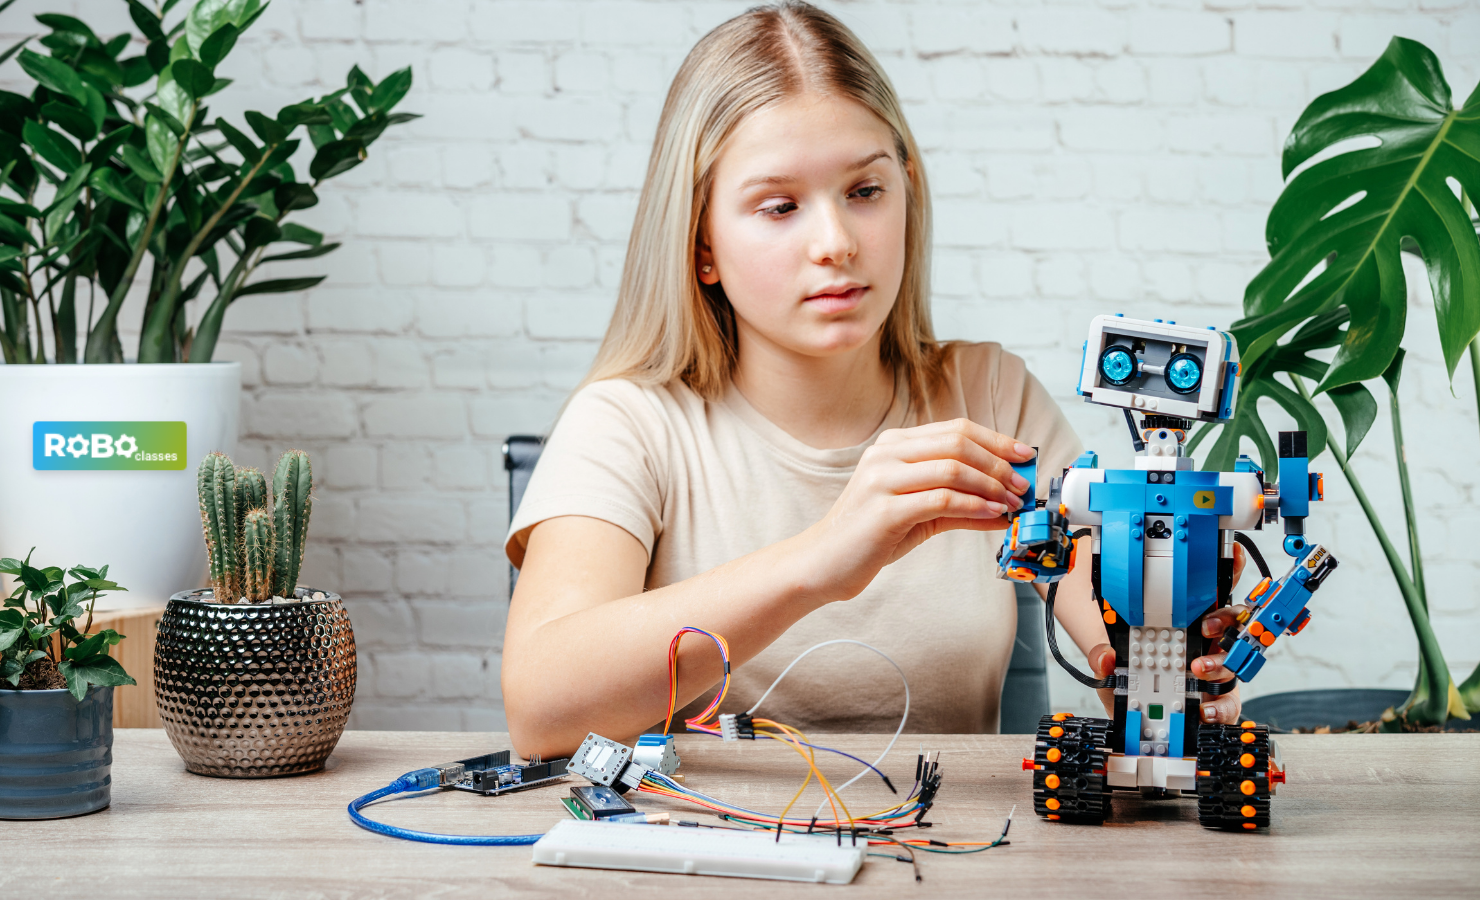 Robotics education and its relevance for kids